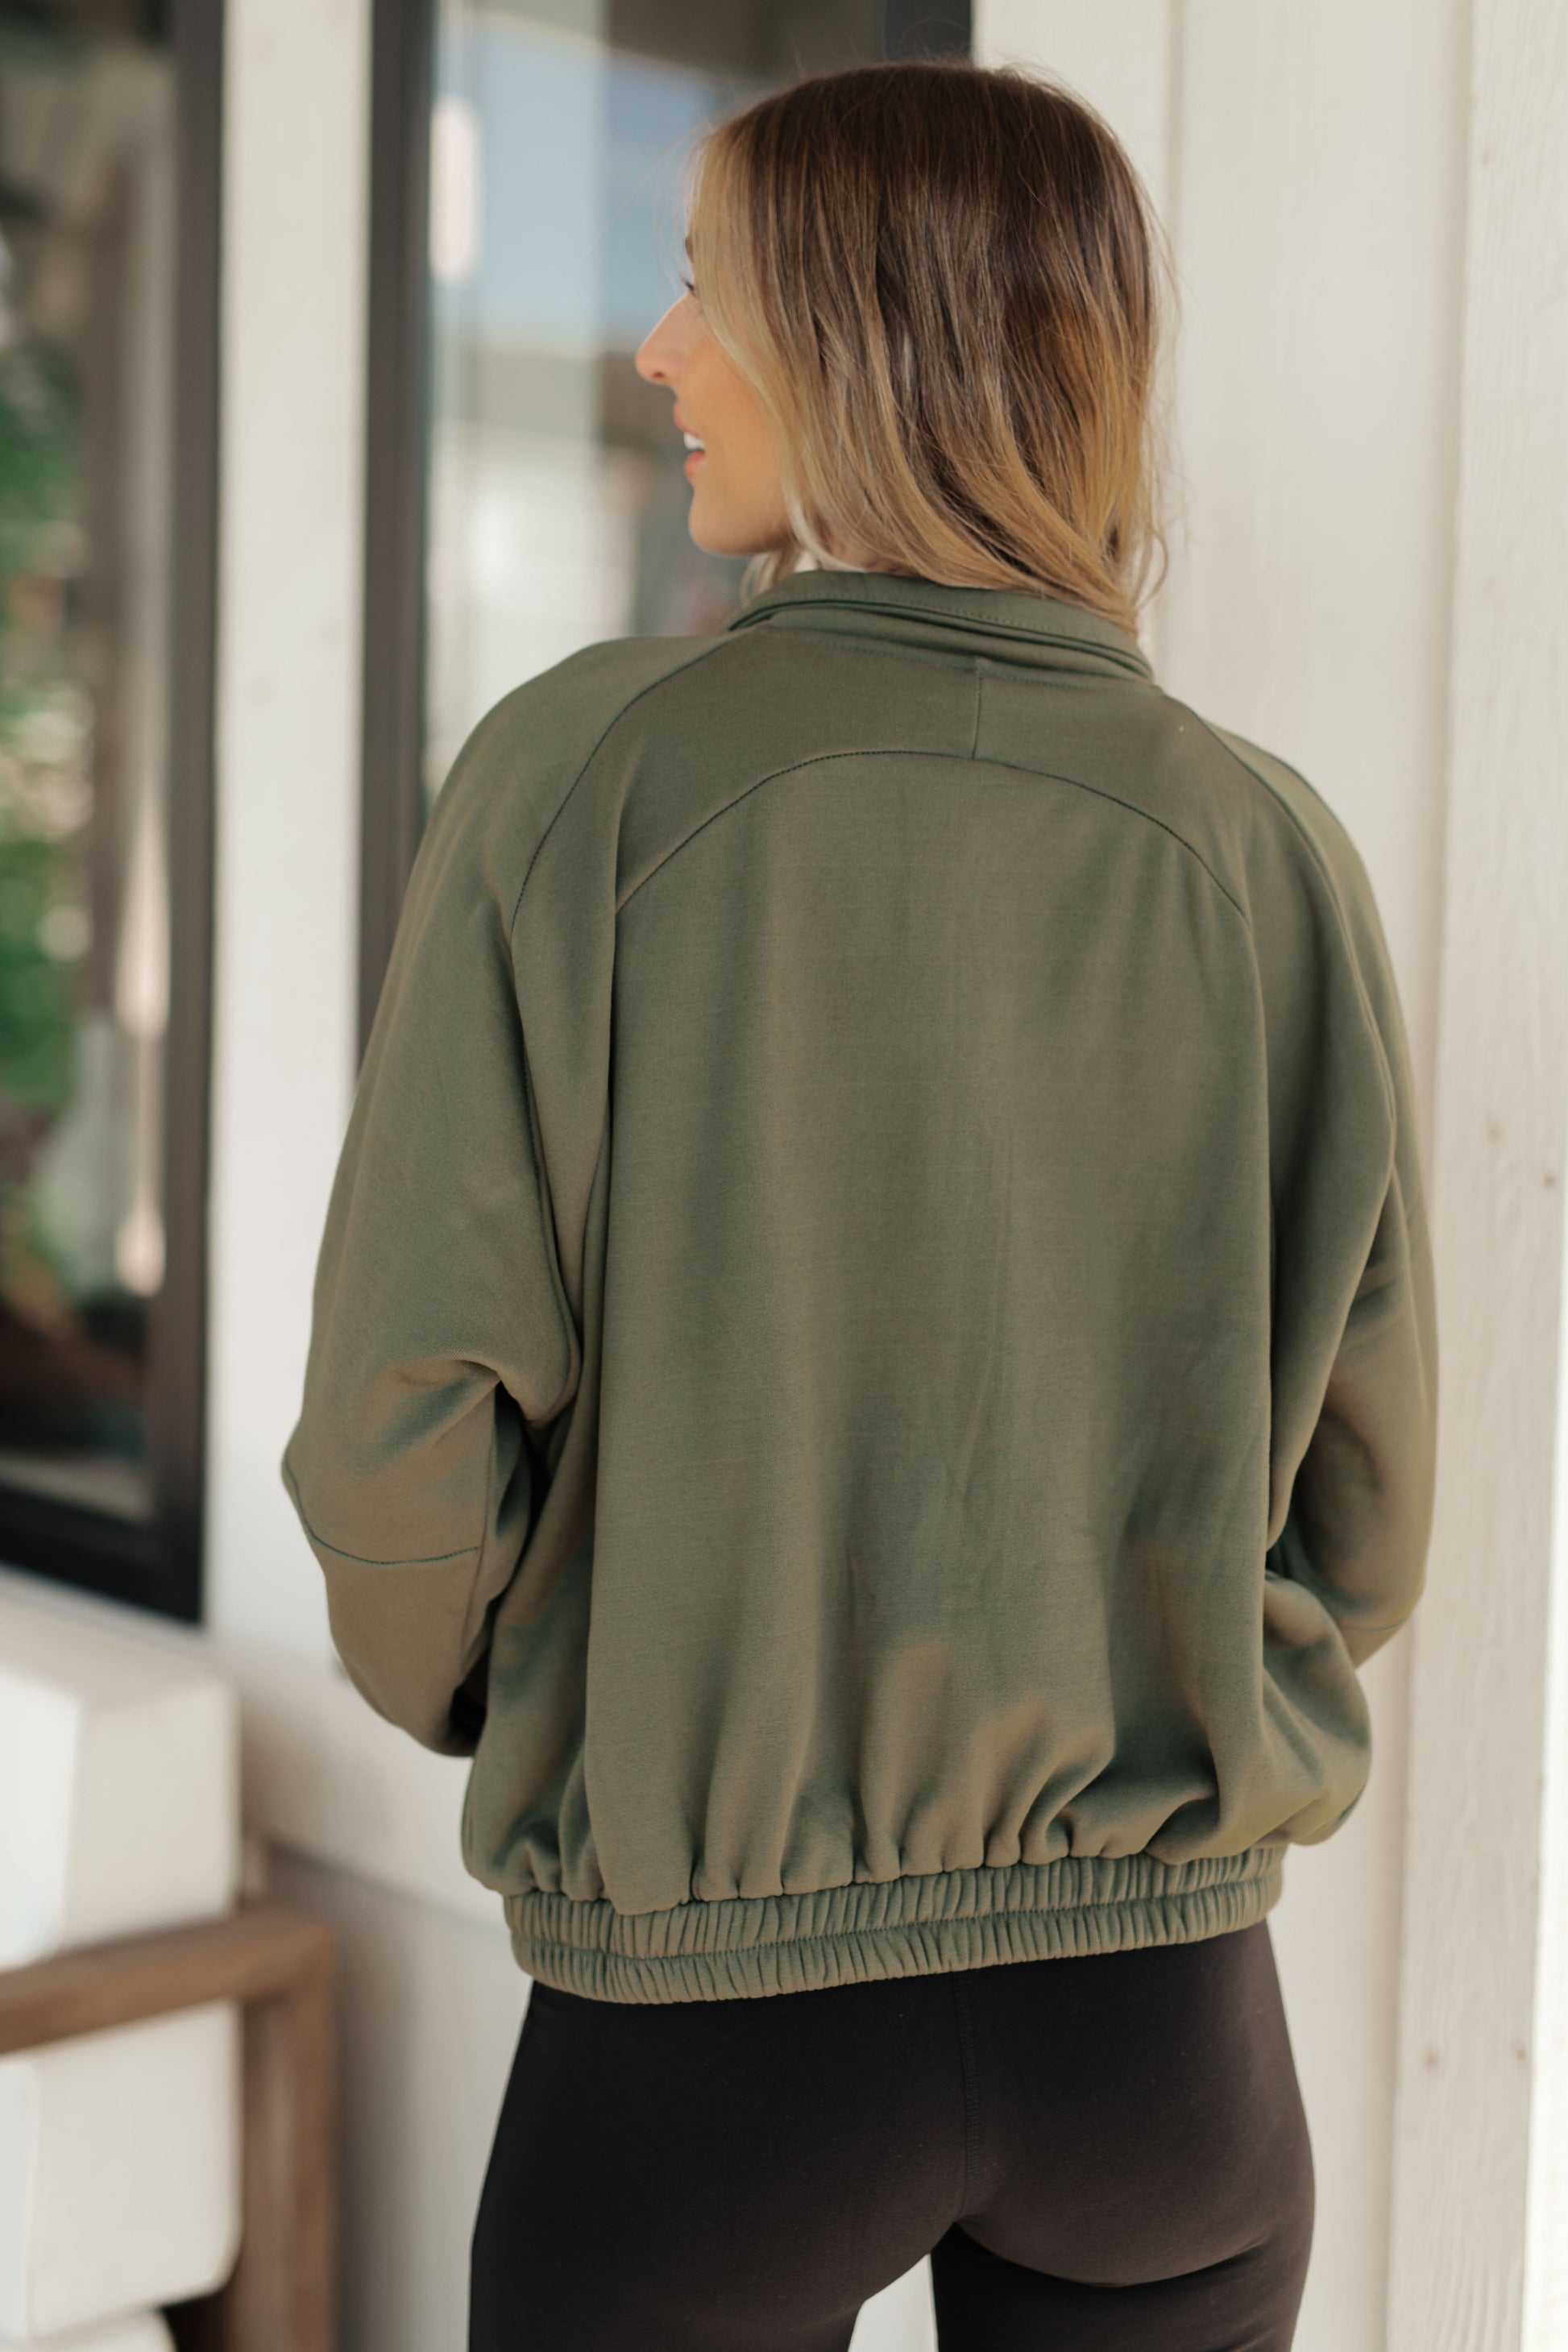 Our Miss You More Sweatshirt is the perfect way to stay warm and cozy. Featuring a high stand mock neckline, contoured seams, snap pockets and a zip front, this timeless piece is designed for a comfortable and flattering fit. S - 3X